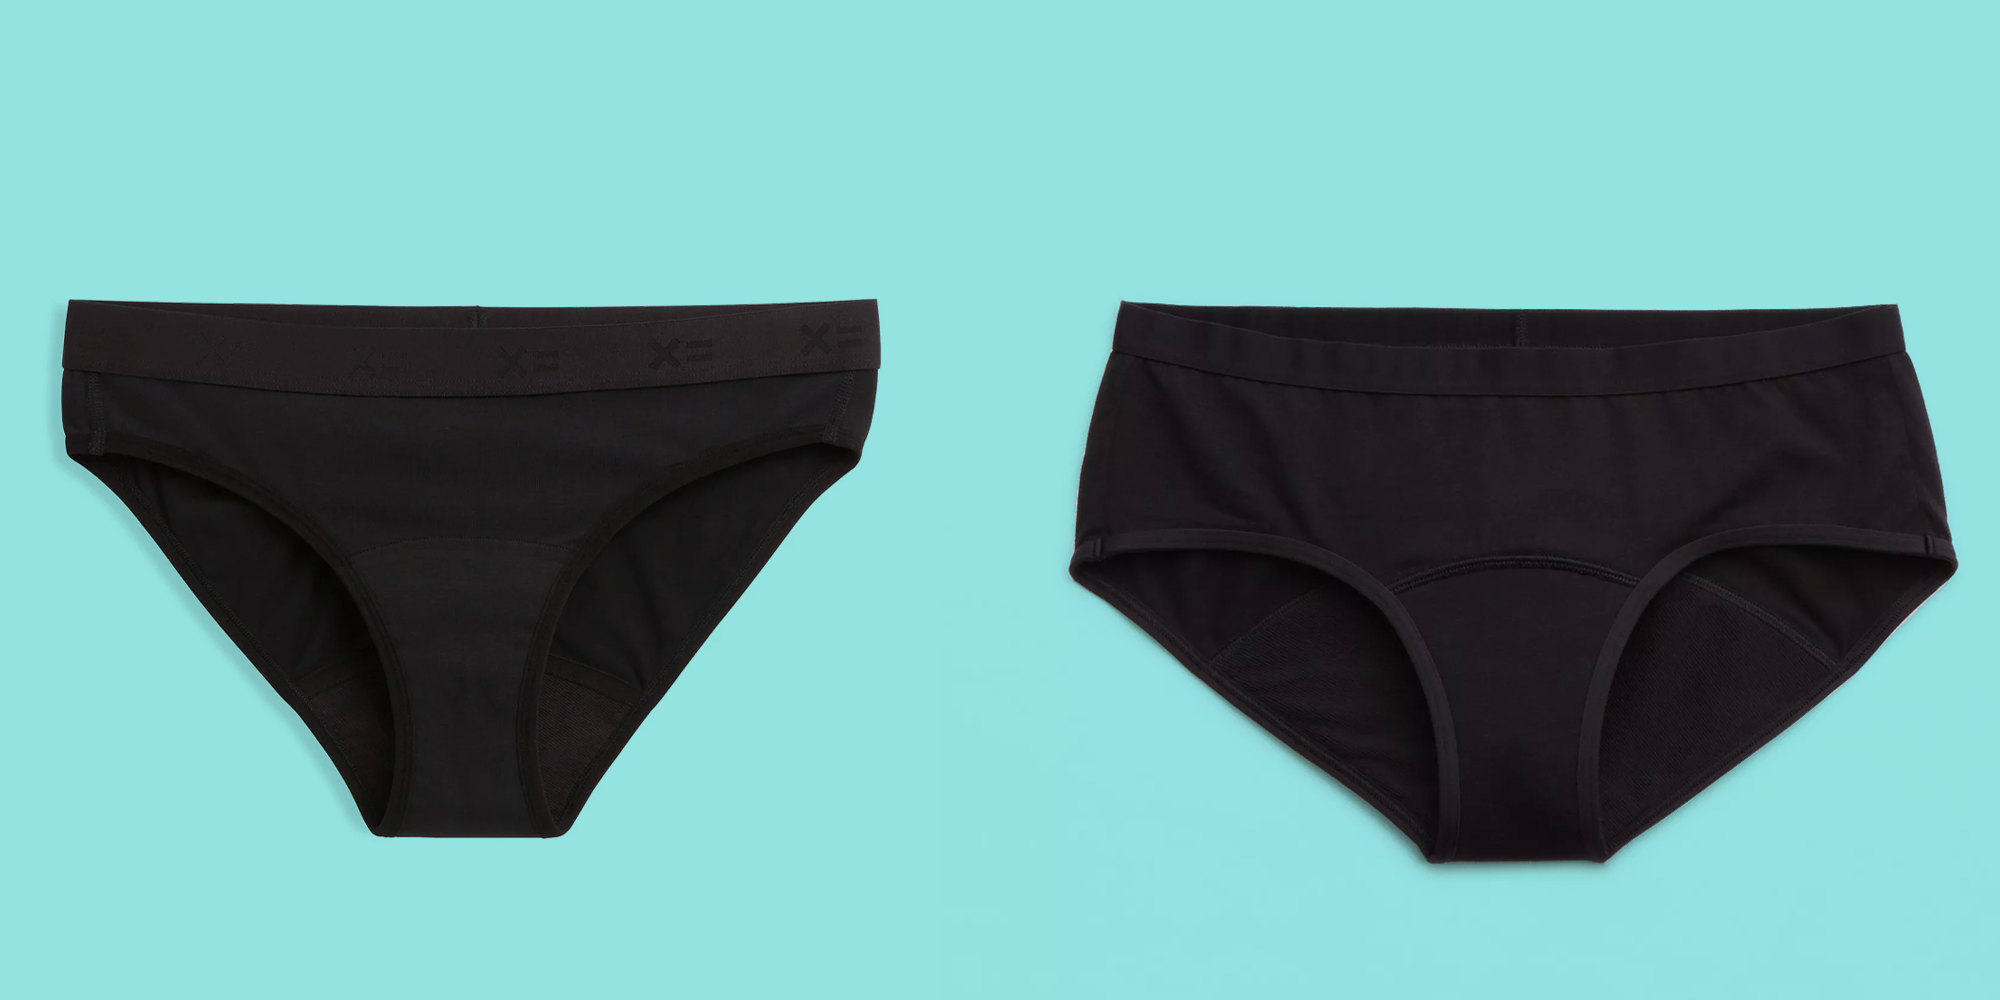 Now is a great time to try these period- and pee-proof undies